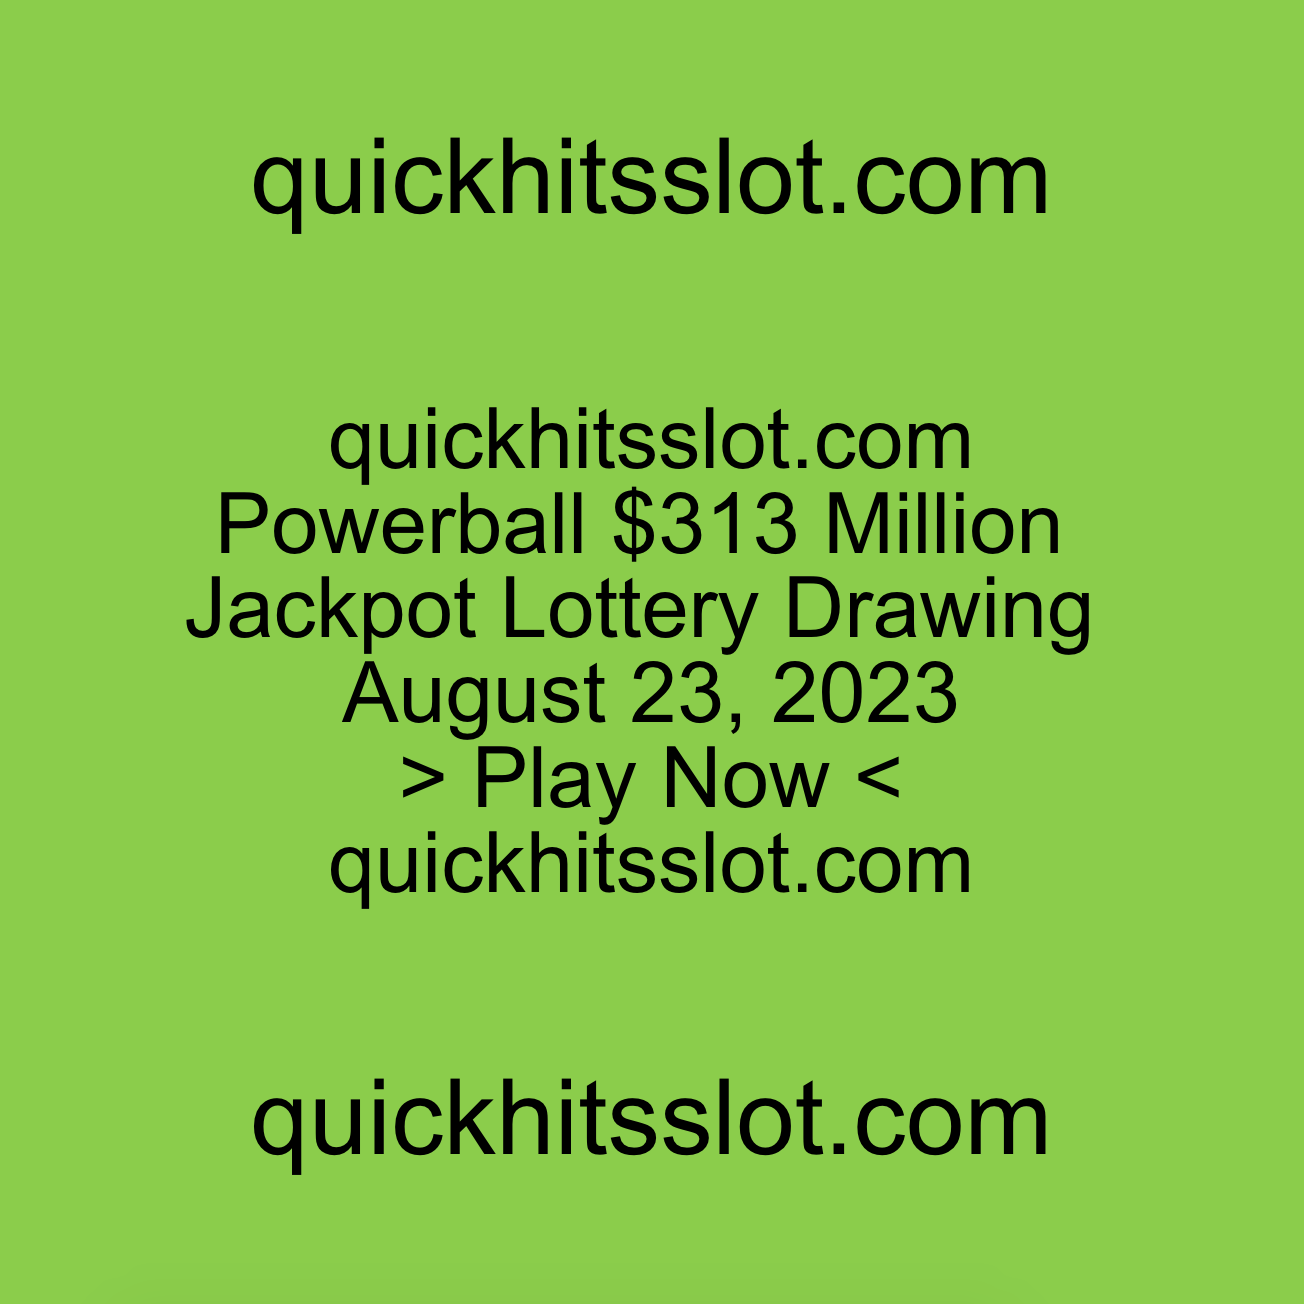 Powerball 313 Million Jackpot Lottery Drawing August 23, 2023